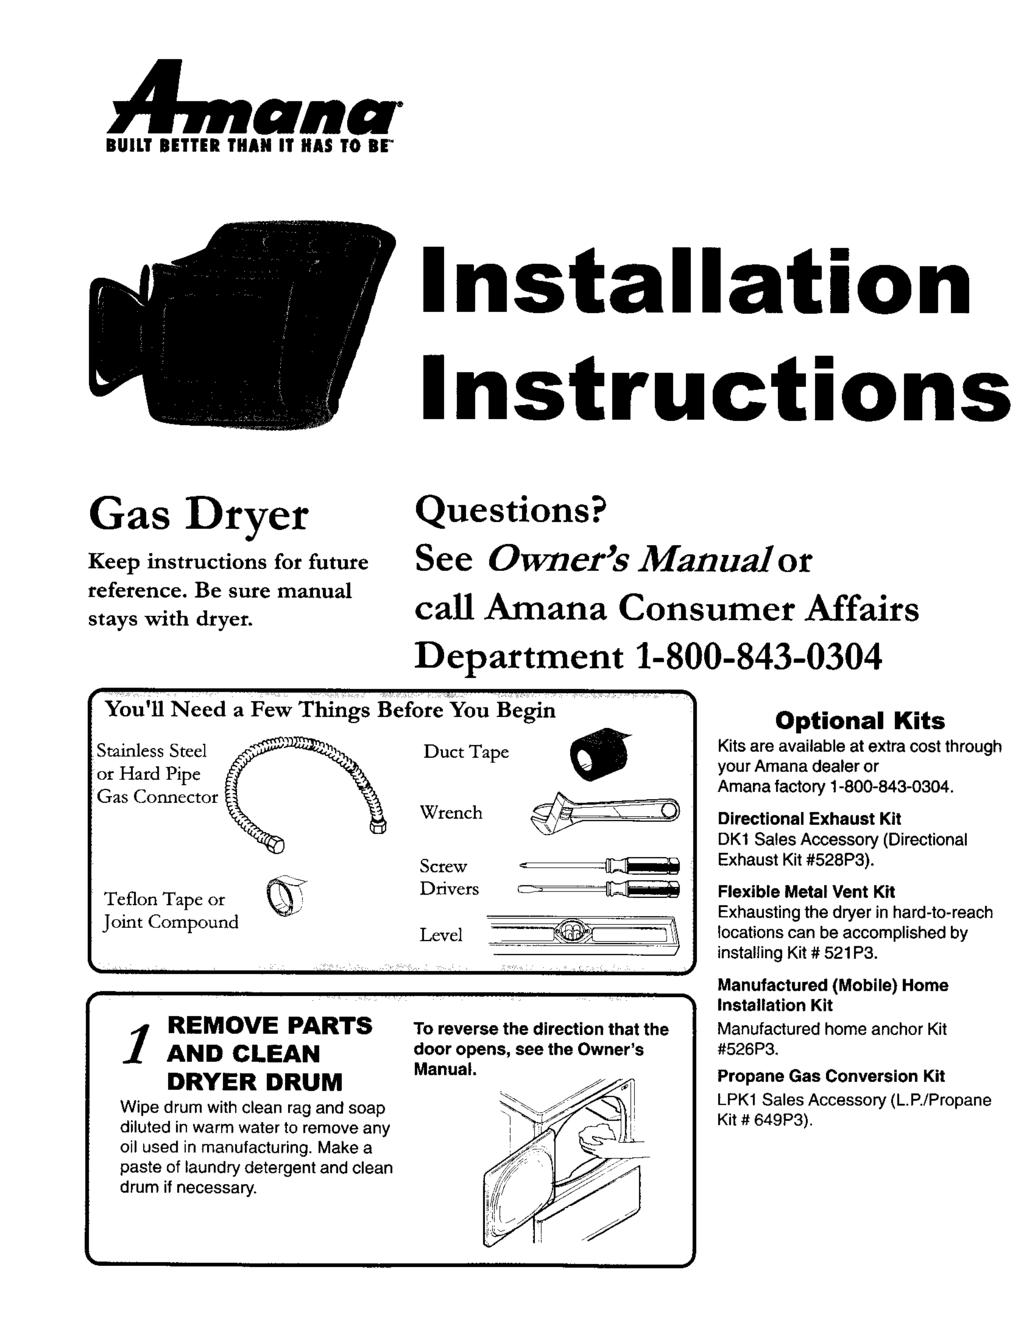 BULT BETTER THAN T HAS TO Br nstallation nstructions Gas Dryer Keep instructions for future reference. Be sure manual stays with dryer. Questions?